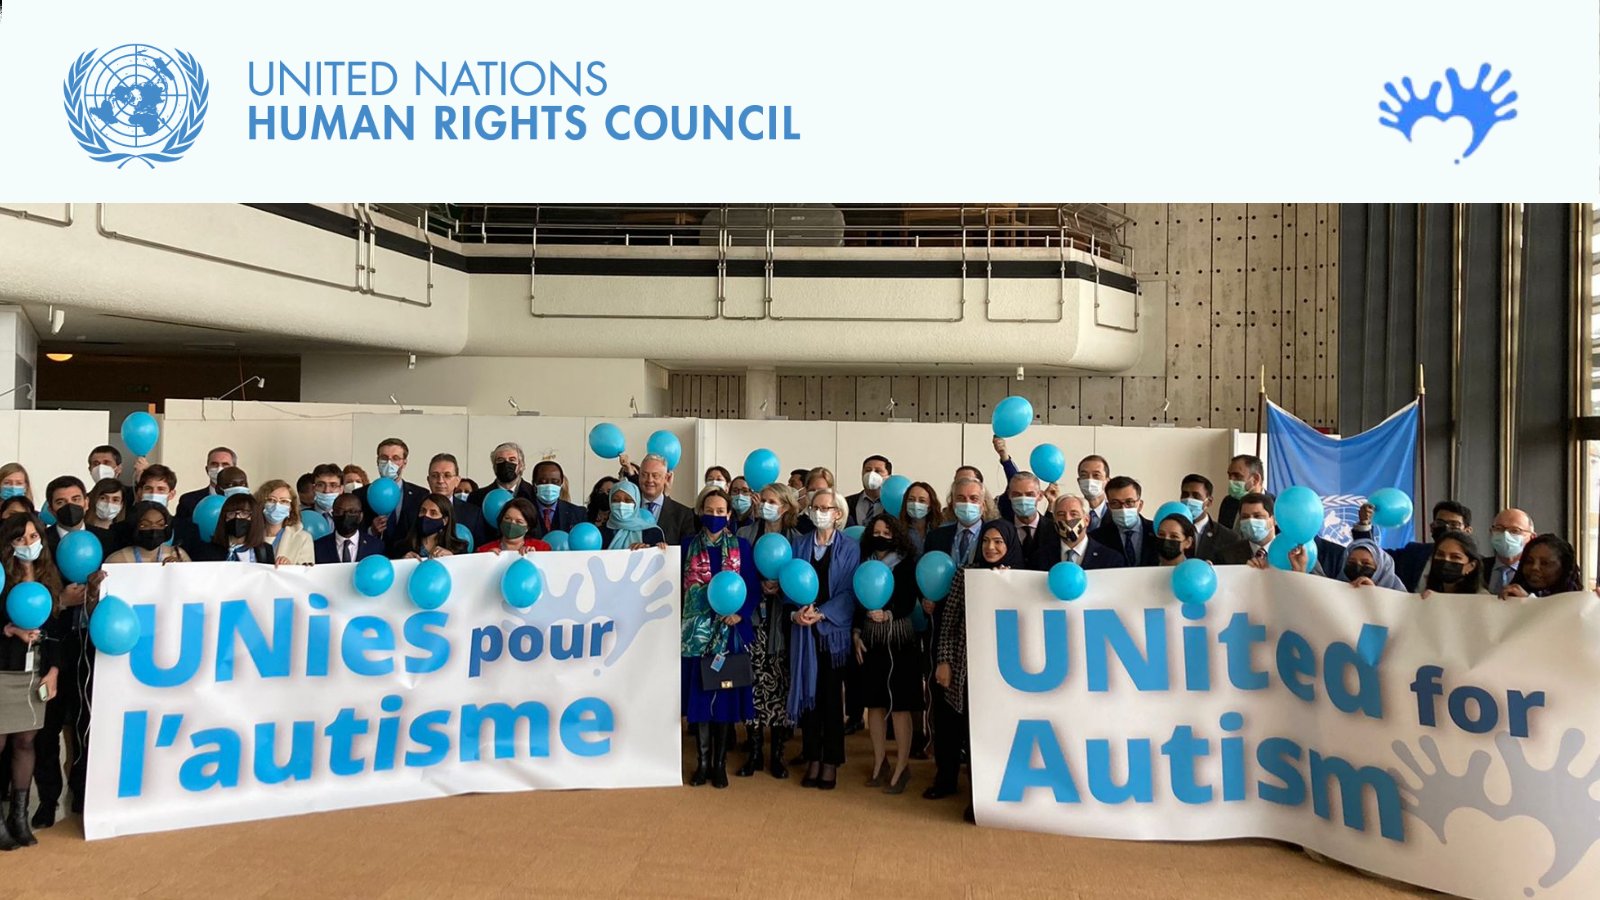 United for Autism and United Nations